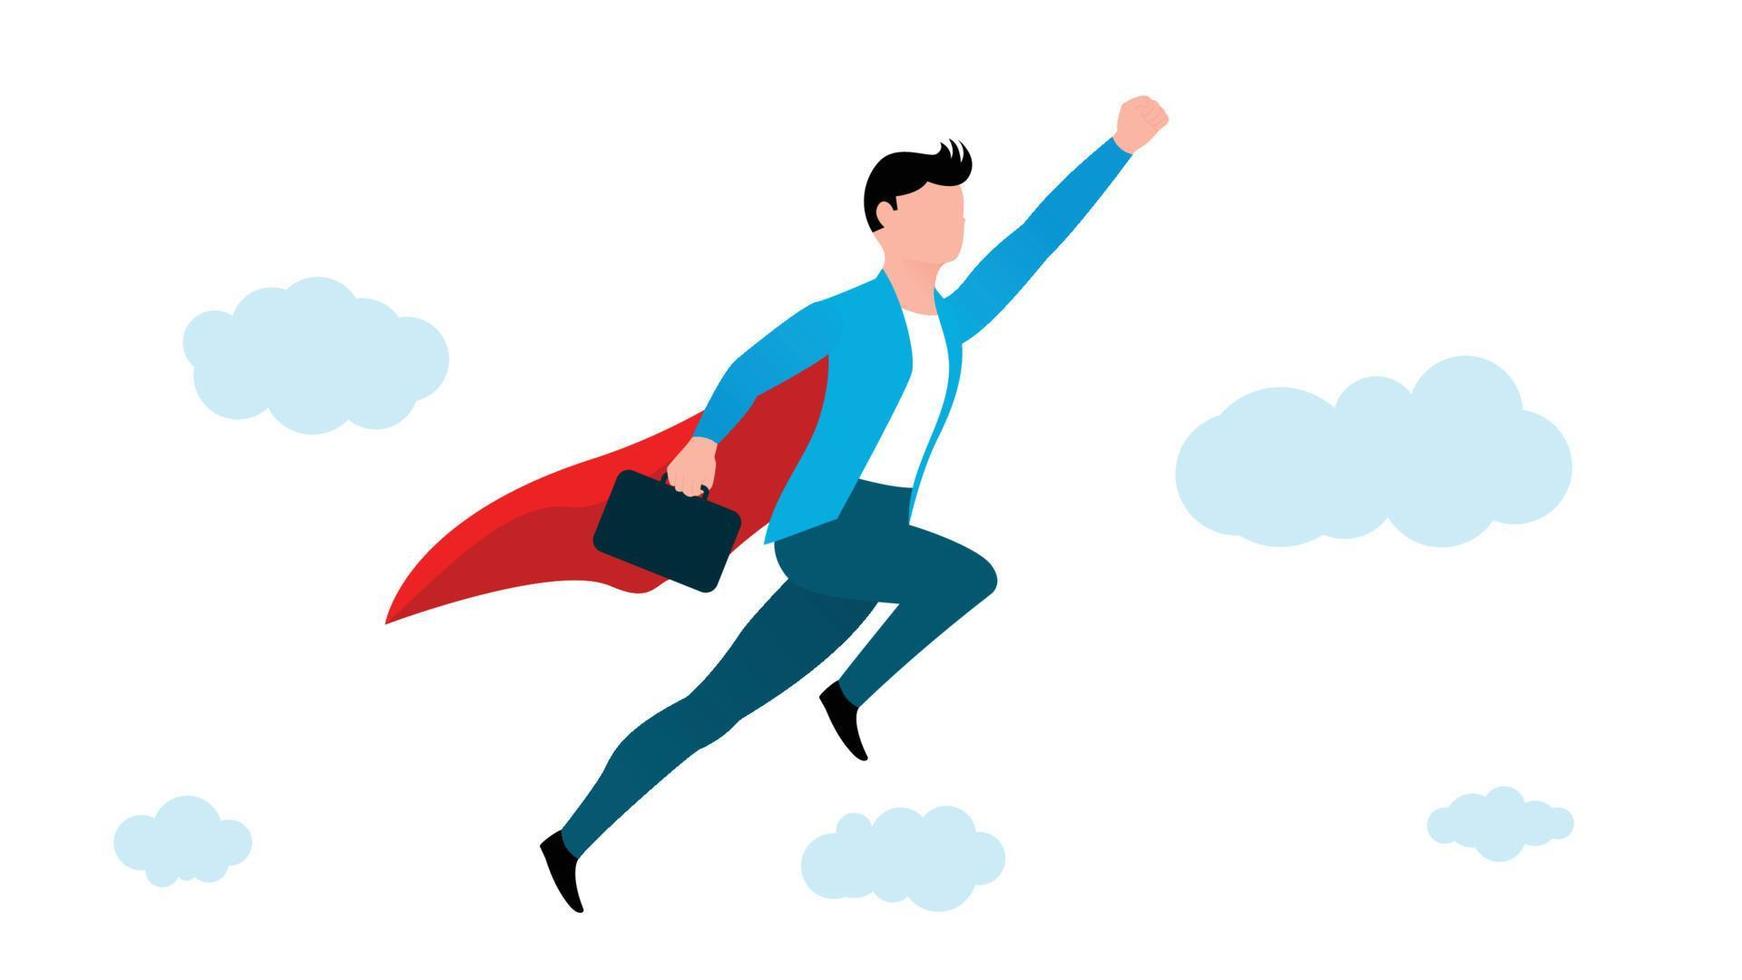 man flying in superhero pose with briefcase, business character vector illustration on white background.